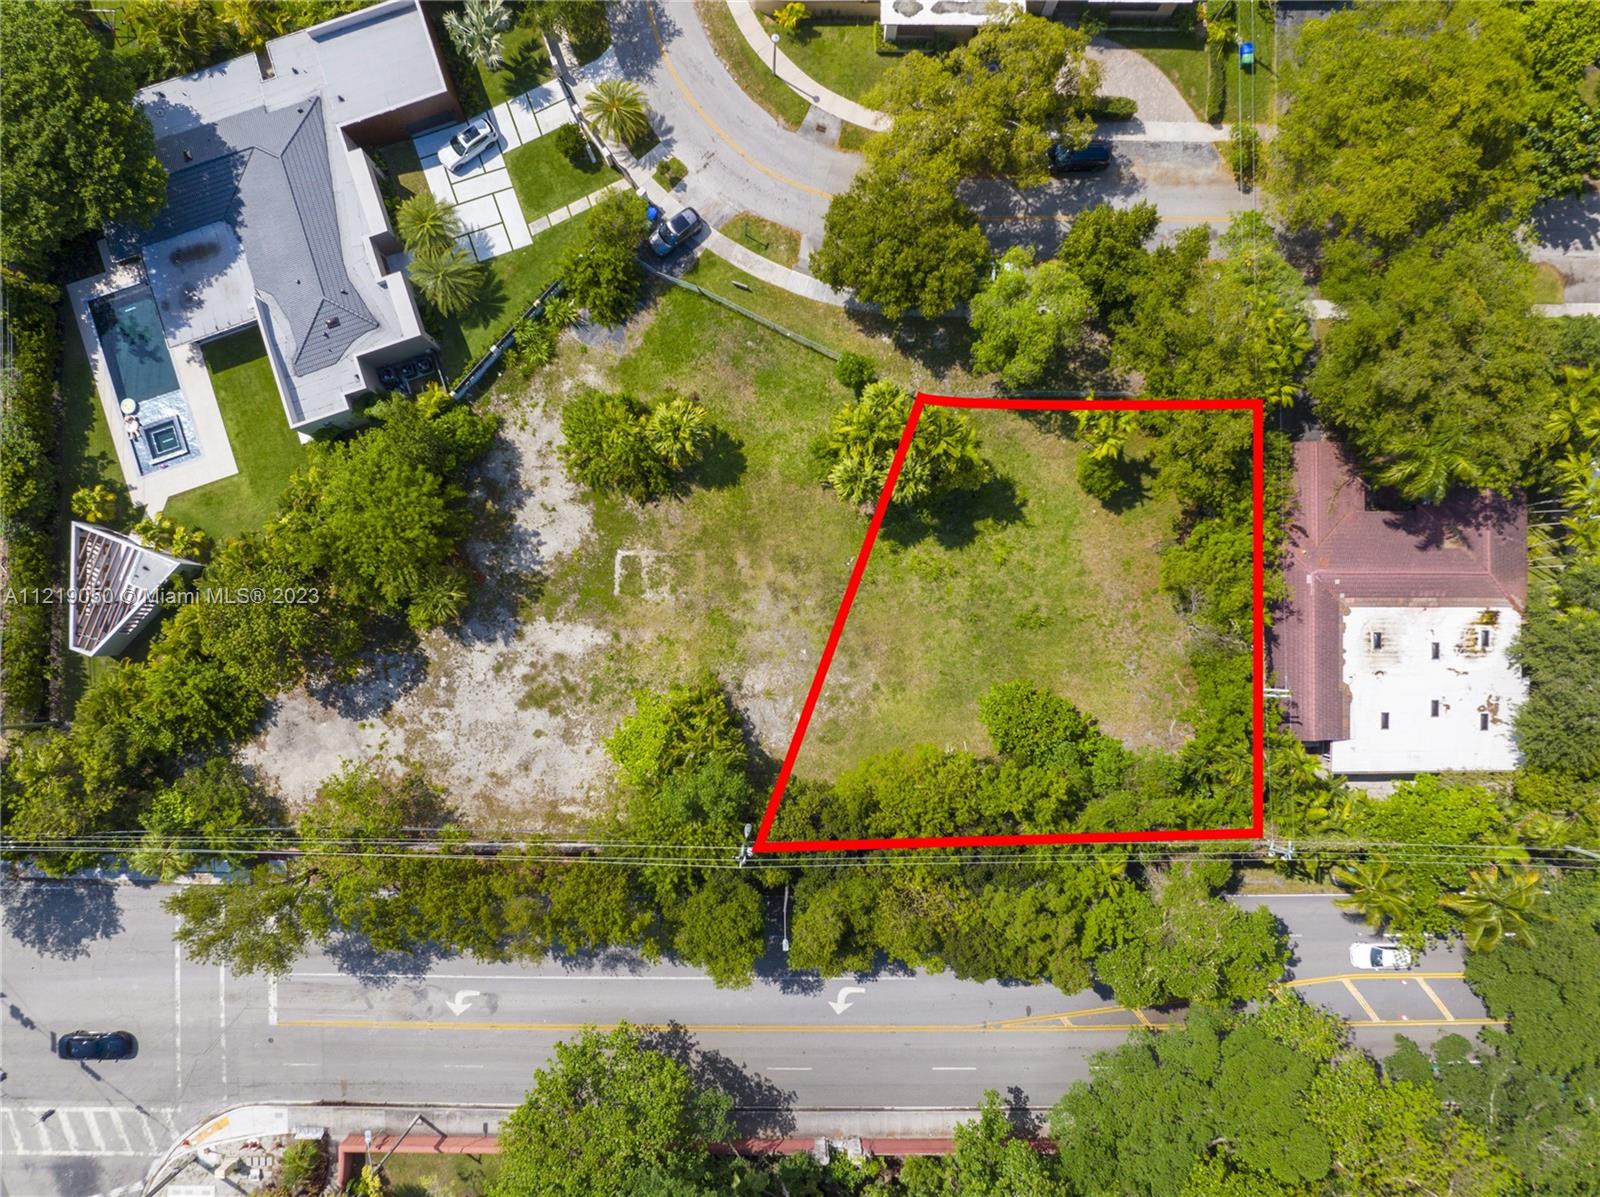 Unique opportunity to purchase this individual large 12,675 SF lot for $1.85M and build your dream home in prestigious and 24 hour policed patrolled Bay Heights! This is a great community with no thru traffic, in a NO FLOOD ZONE!  It is walking distance to Viscaya, Kennedy Park, the Bay and Ransom Everglades Middle School. 
Or purchase two lots side by side for a combined square footage of 30,574, asking $4.4M!  
We can put you in touch with lenders and construction companies to customise your home.